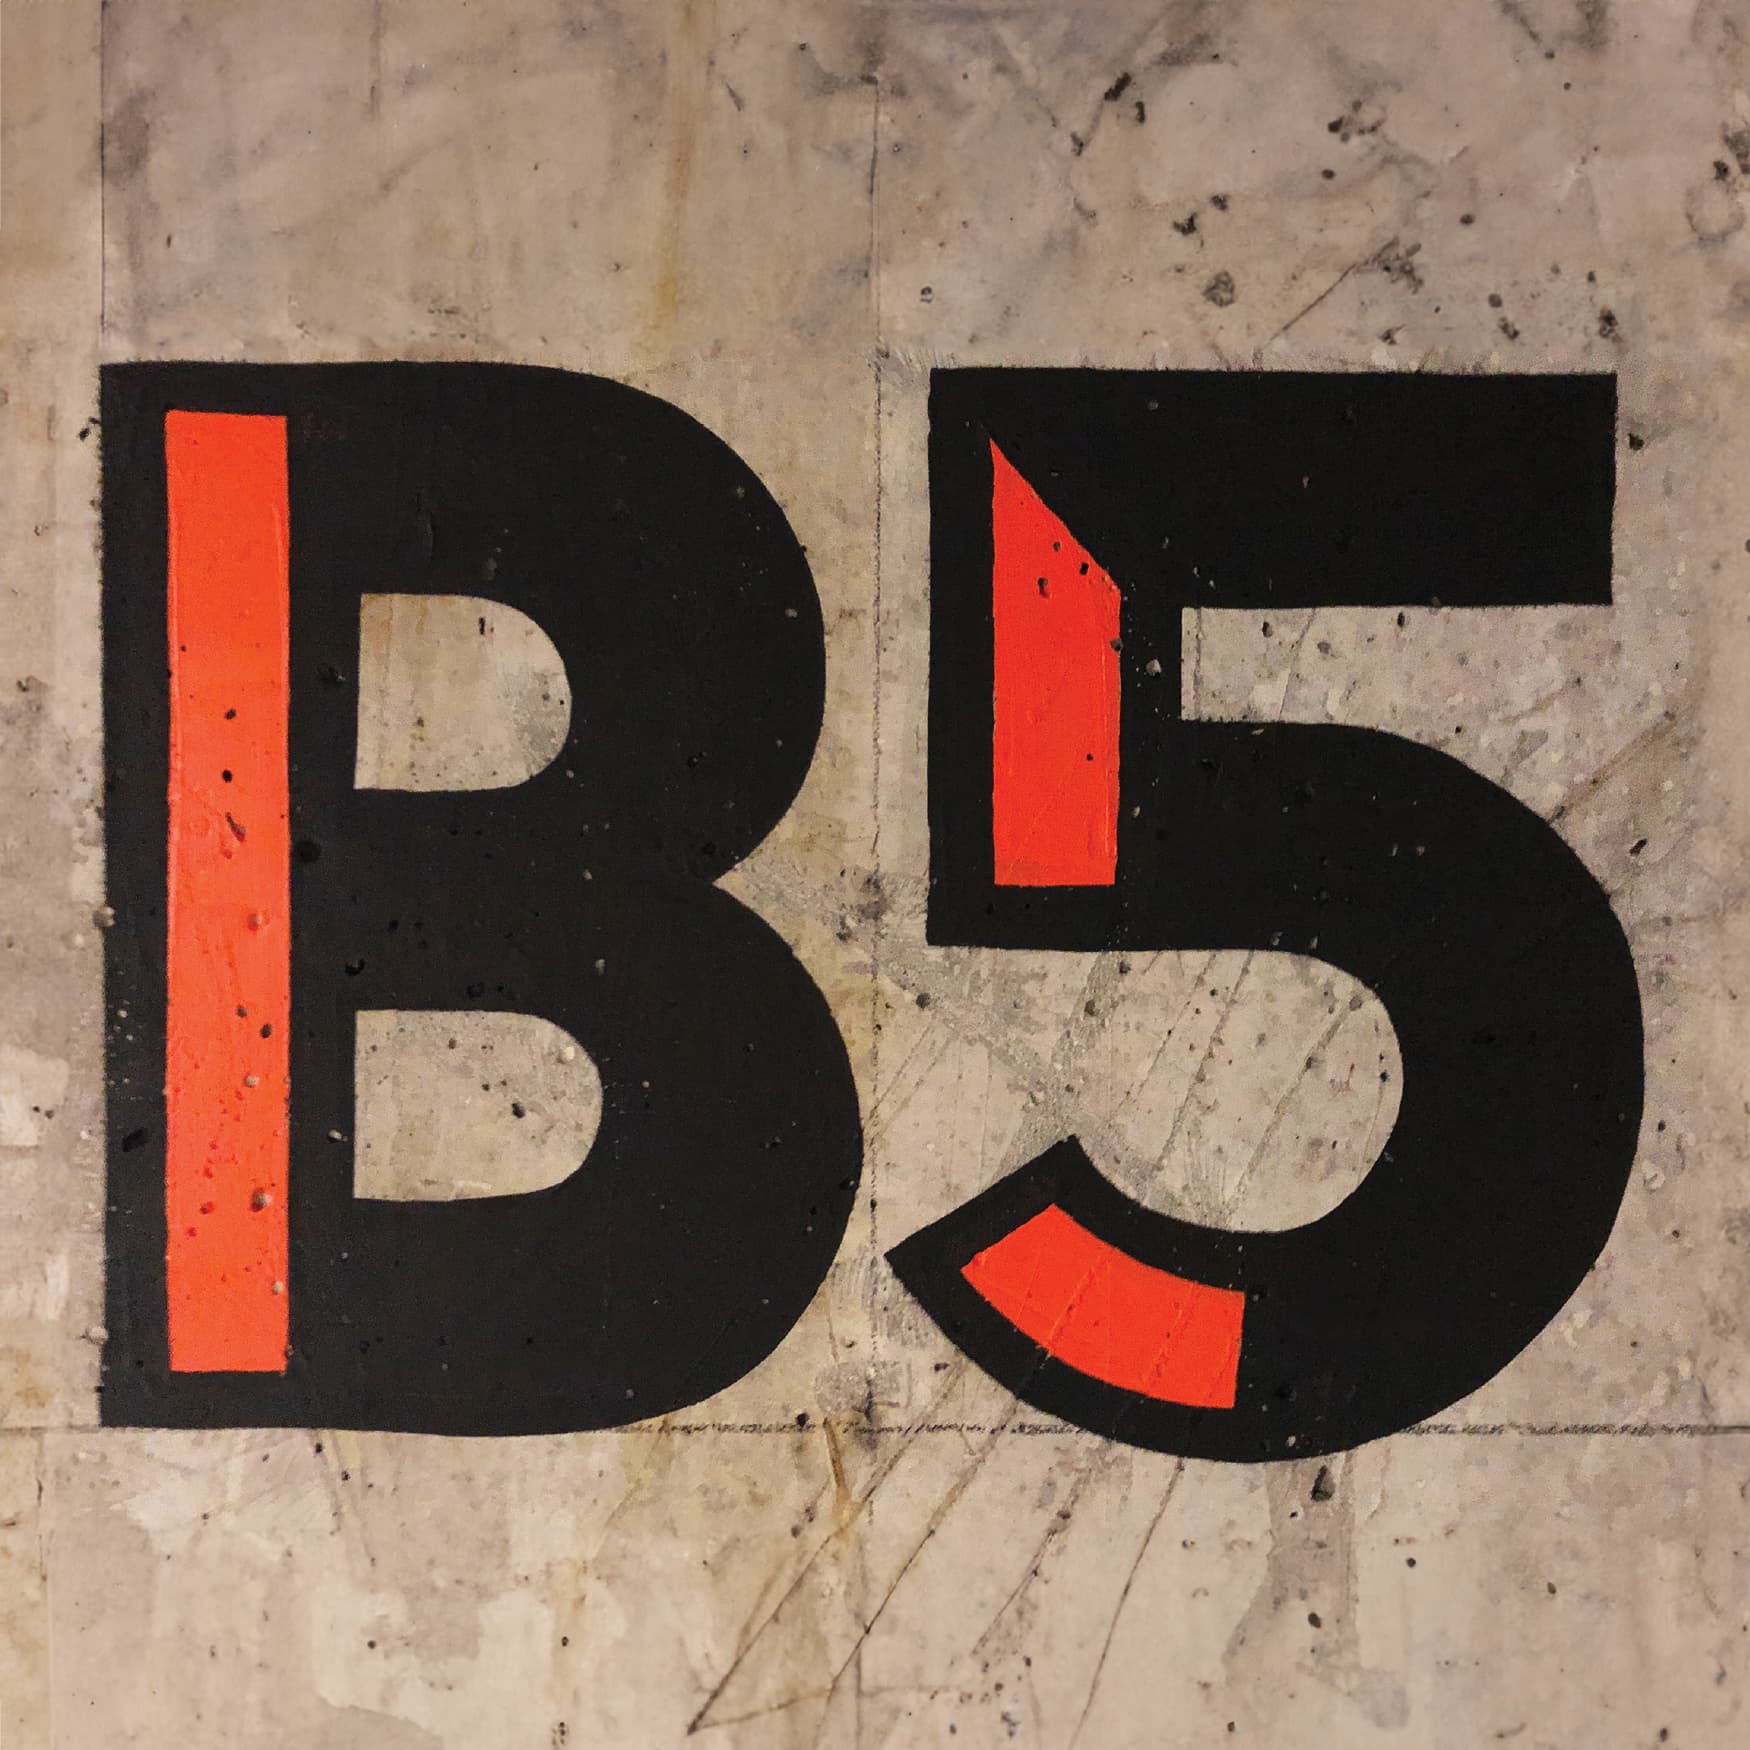 Parking identity signage for B5 zone. Geometric and colorful painted parking garage signage, designed by RSM Design. 